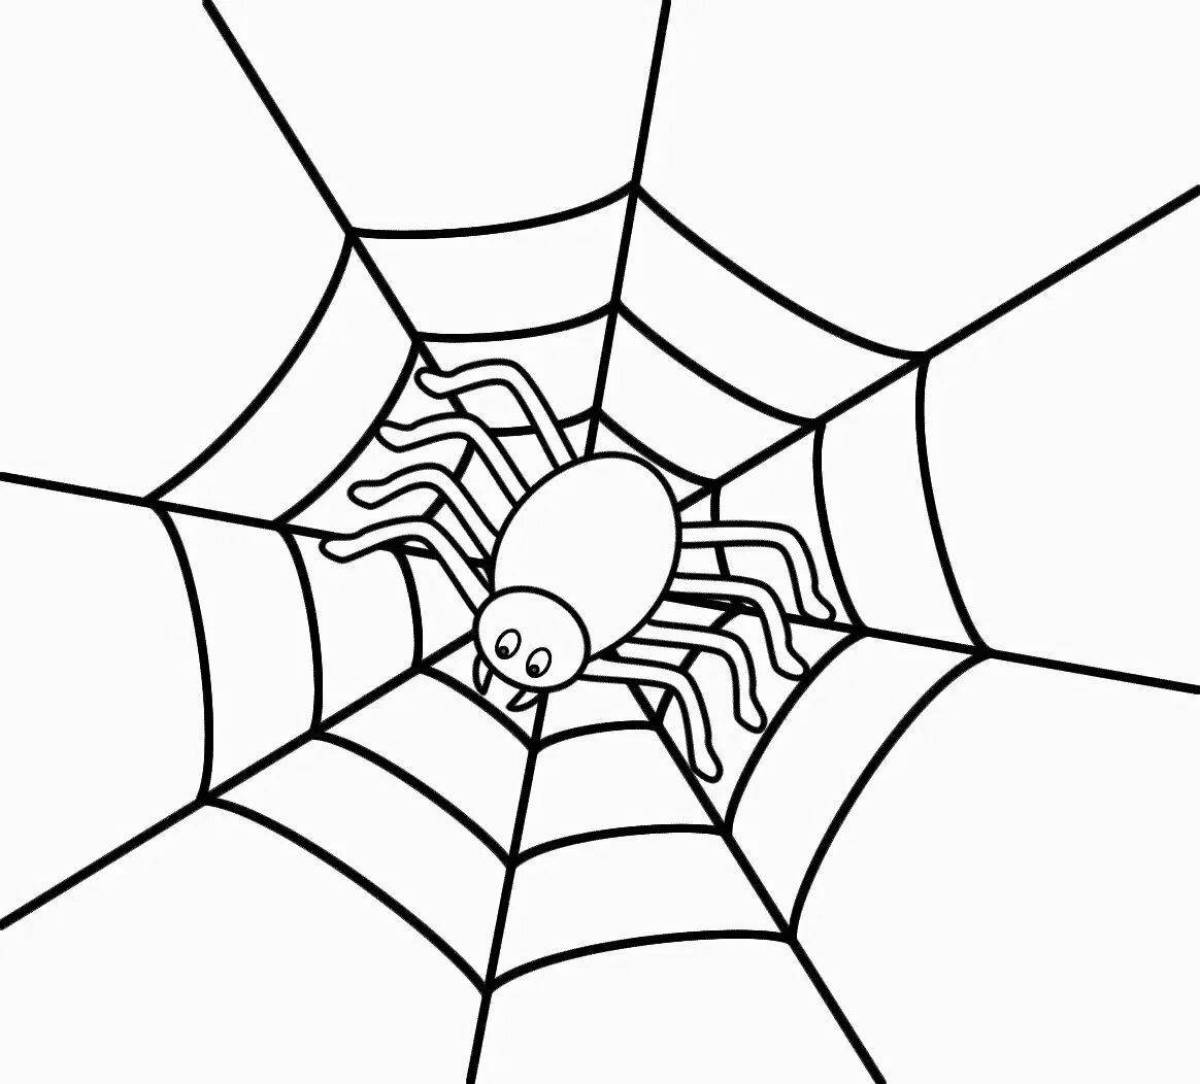 Mystical web coloring for children